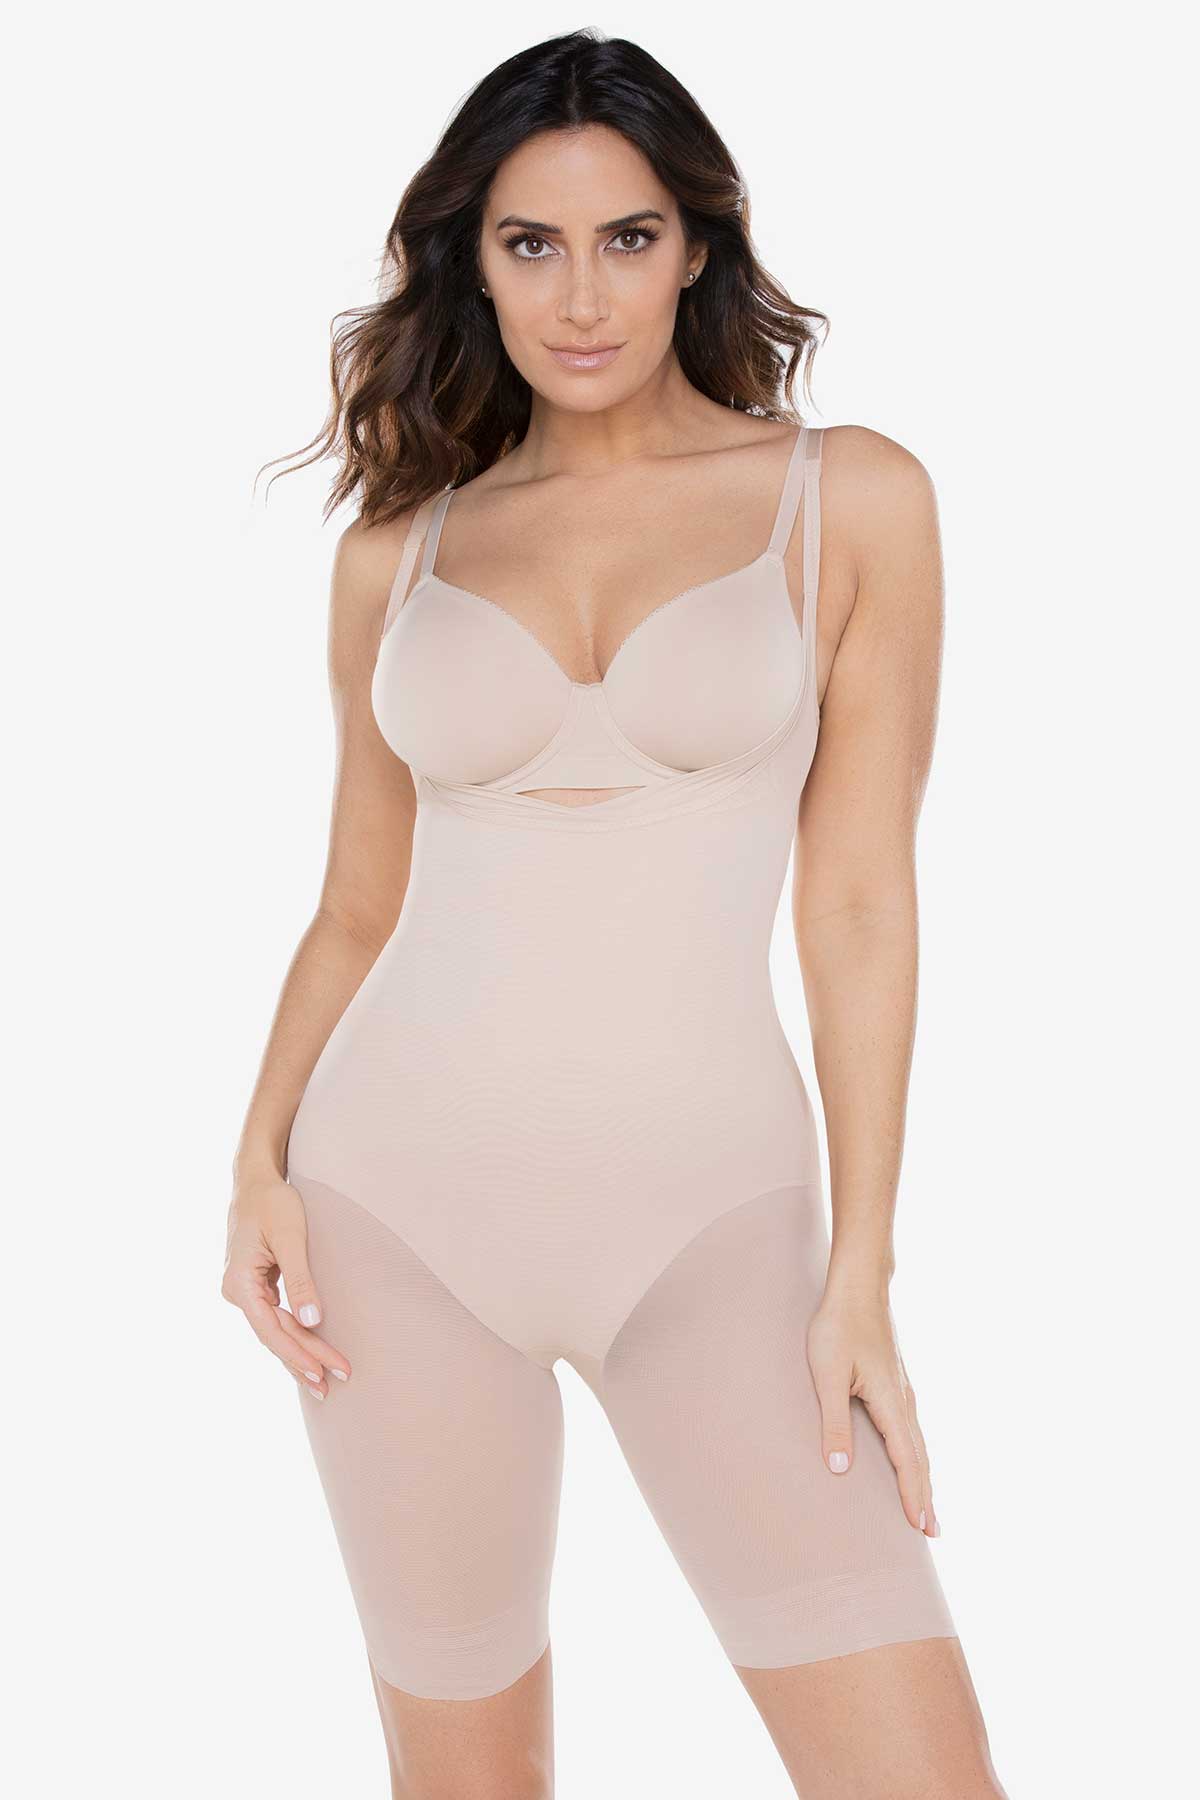 Buy Miraclesuit High Waisted Sheer Firm Tummy Control Thong from